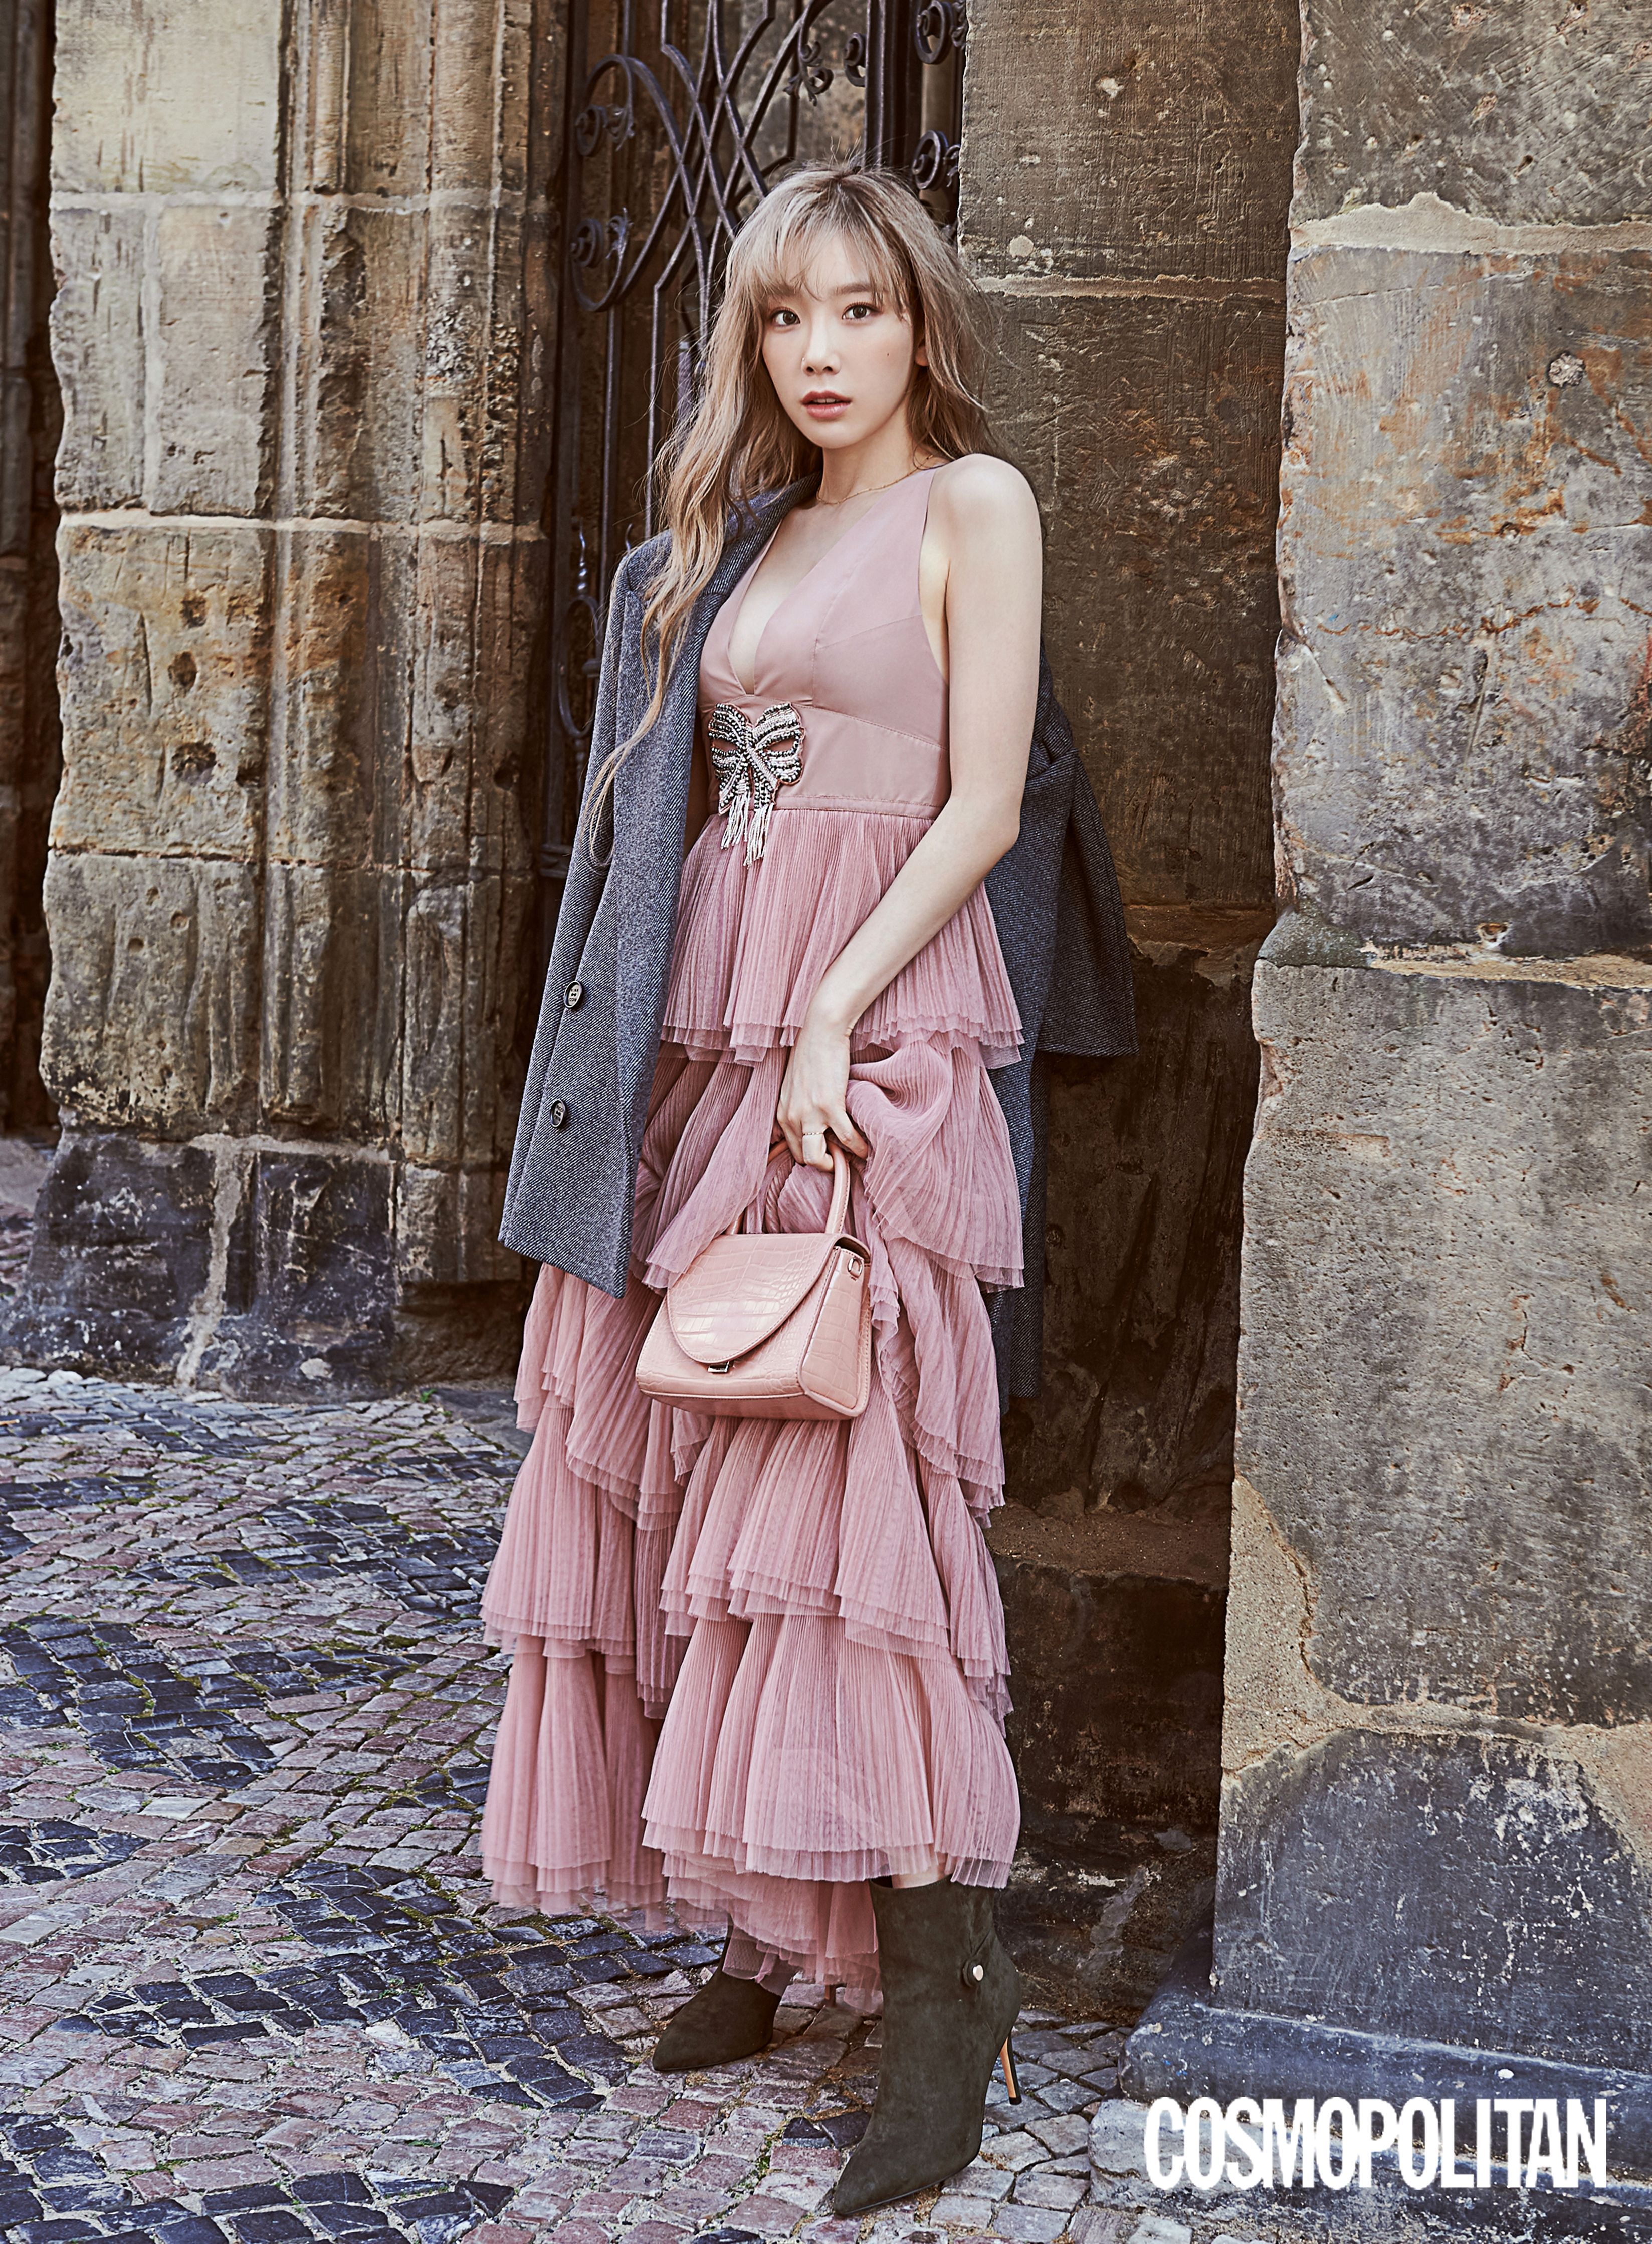 SNSD's Taeyeon for Cosmopolitan Magazine October 2019 issue